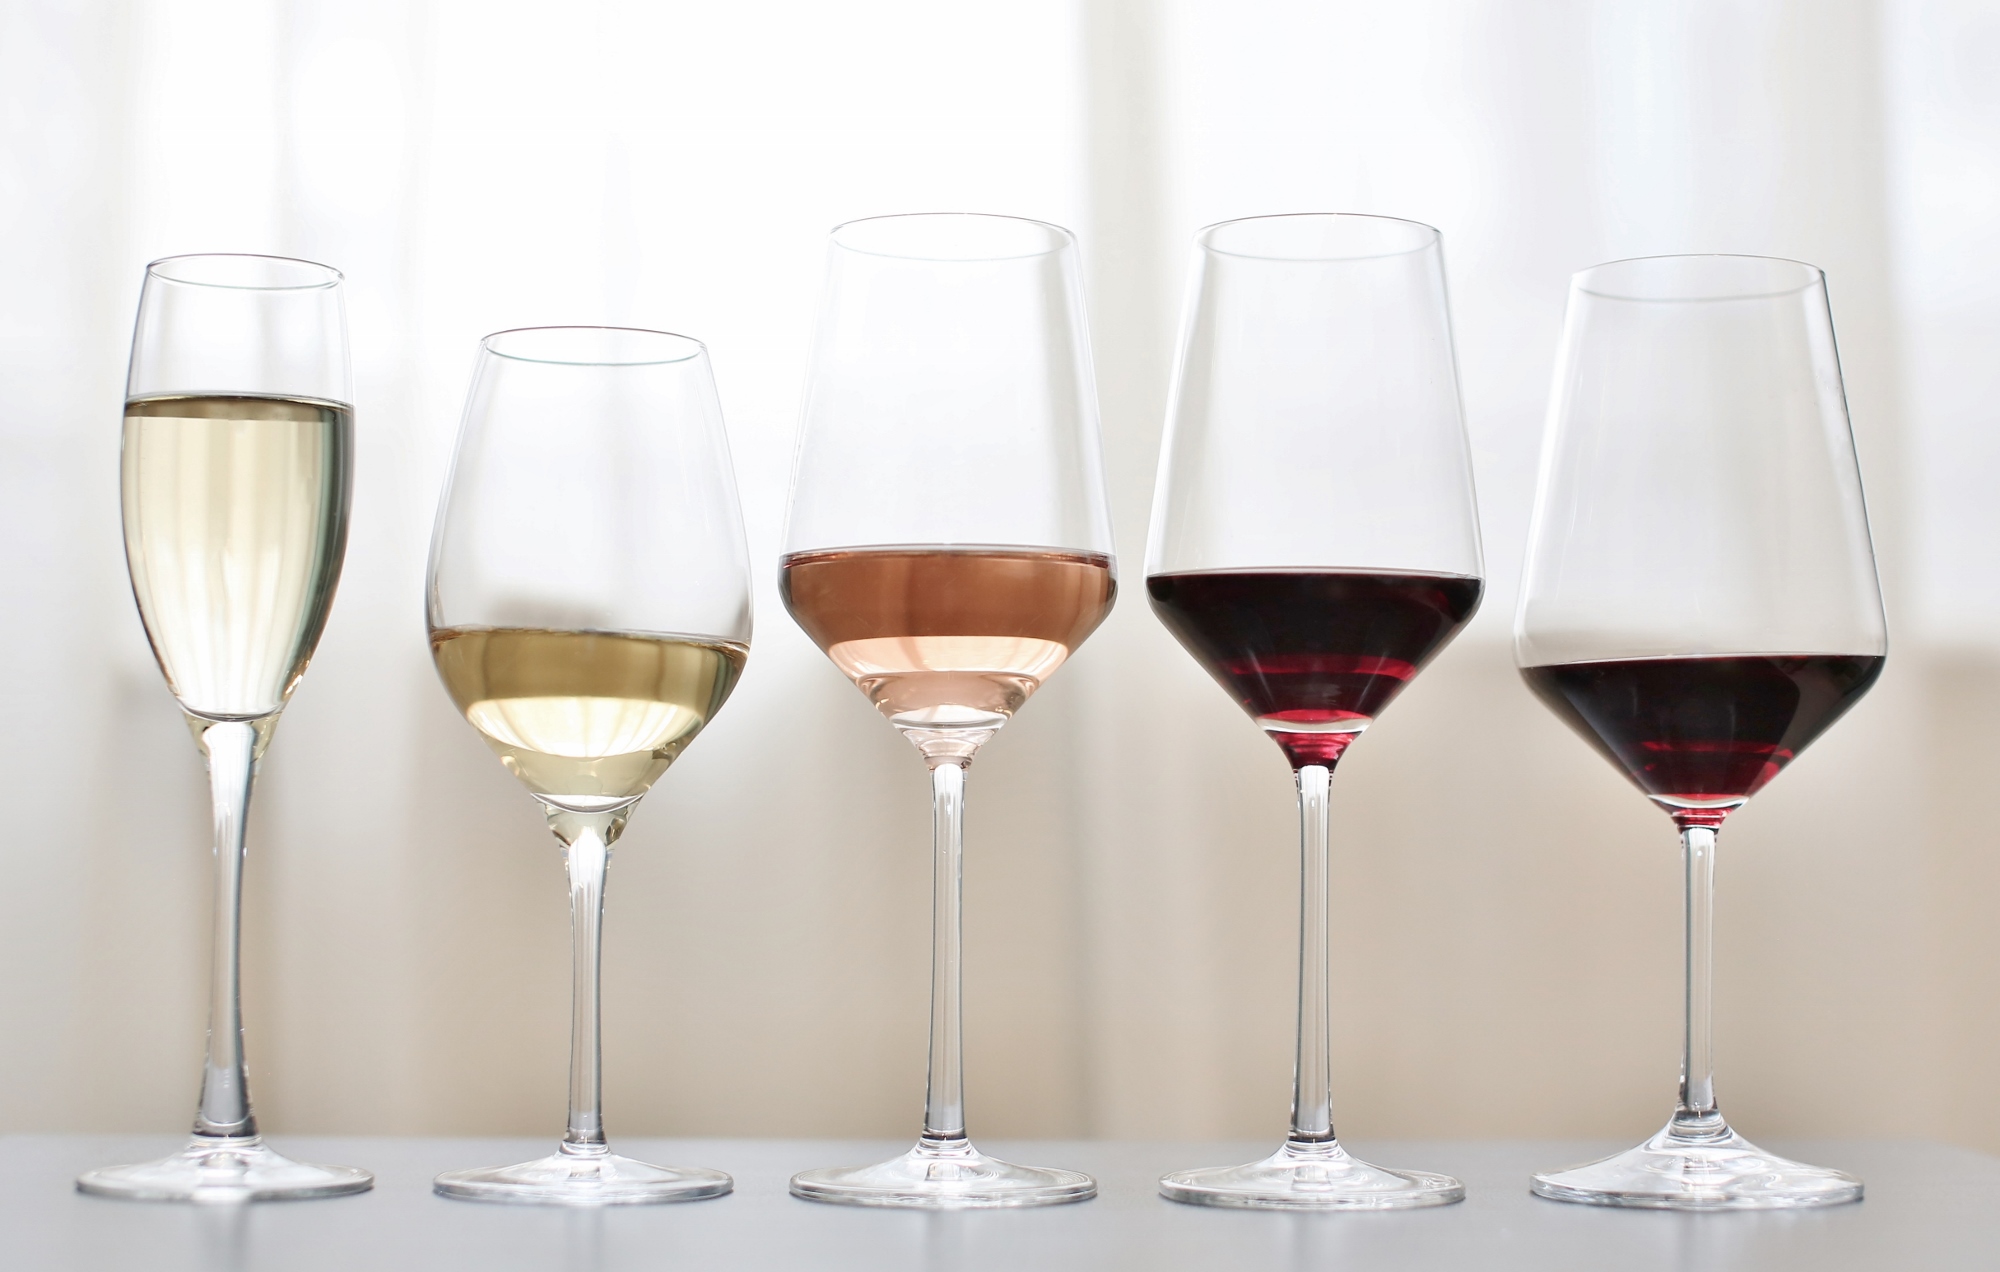 10 Types of Wine Glasses You Should Know About - 2020 ...